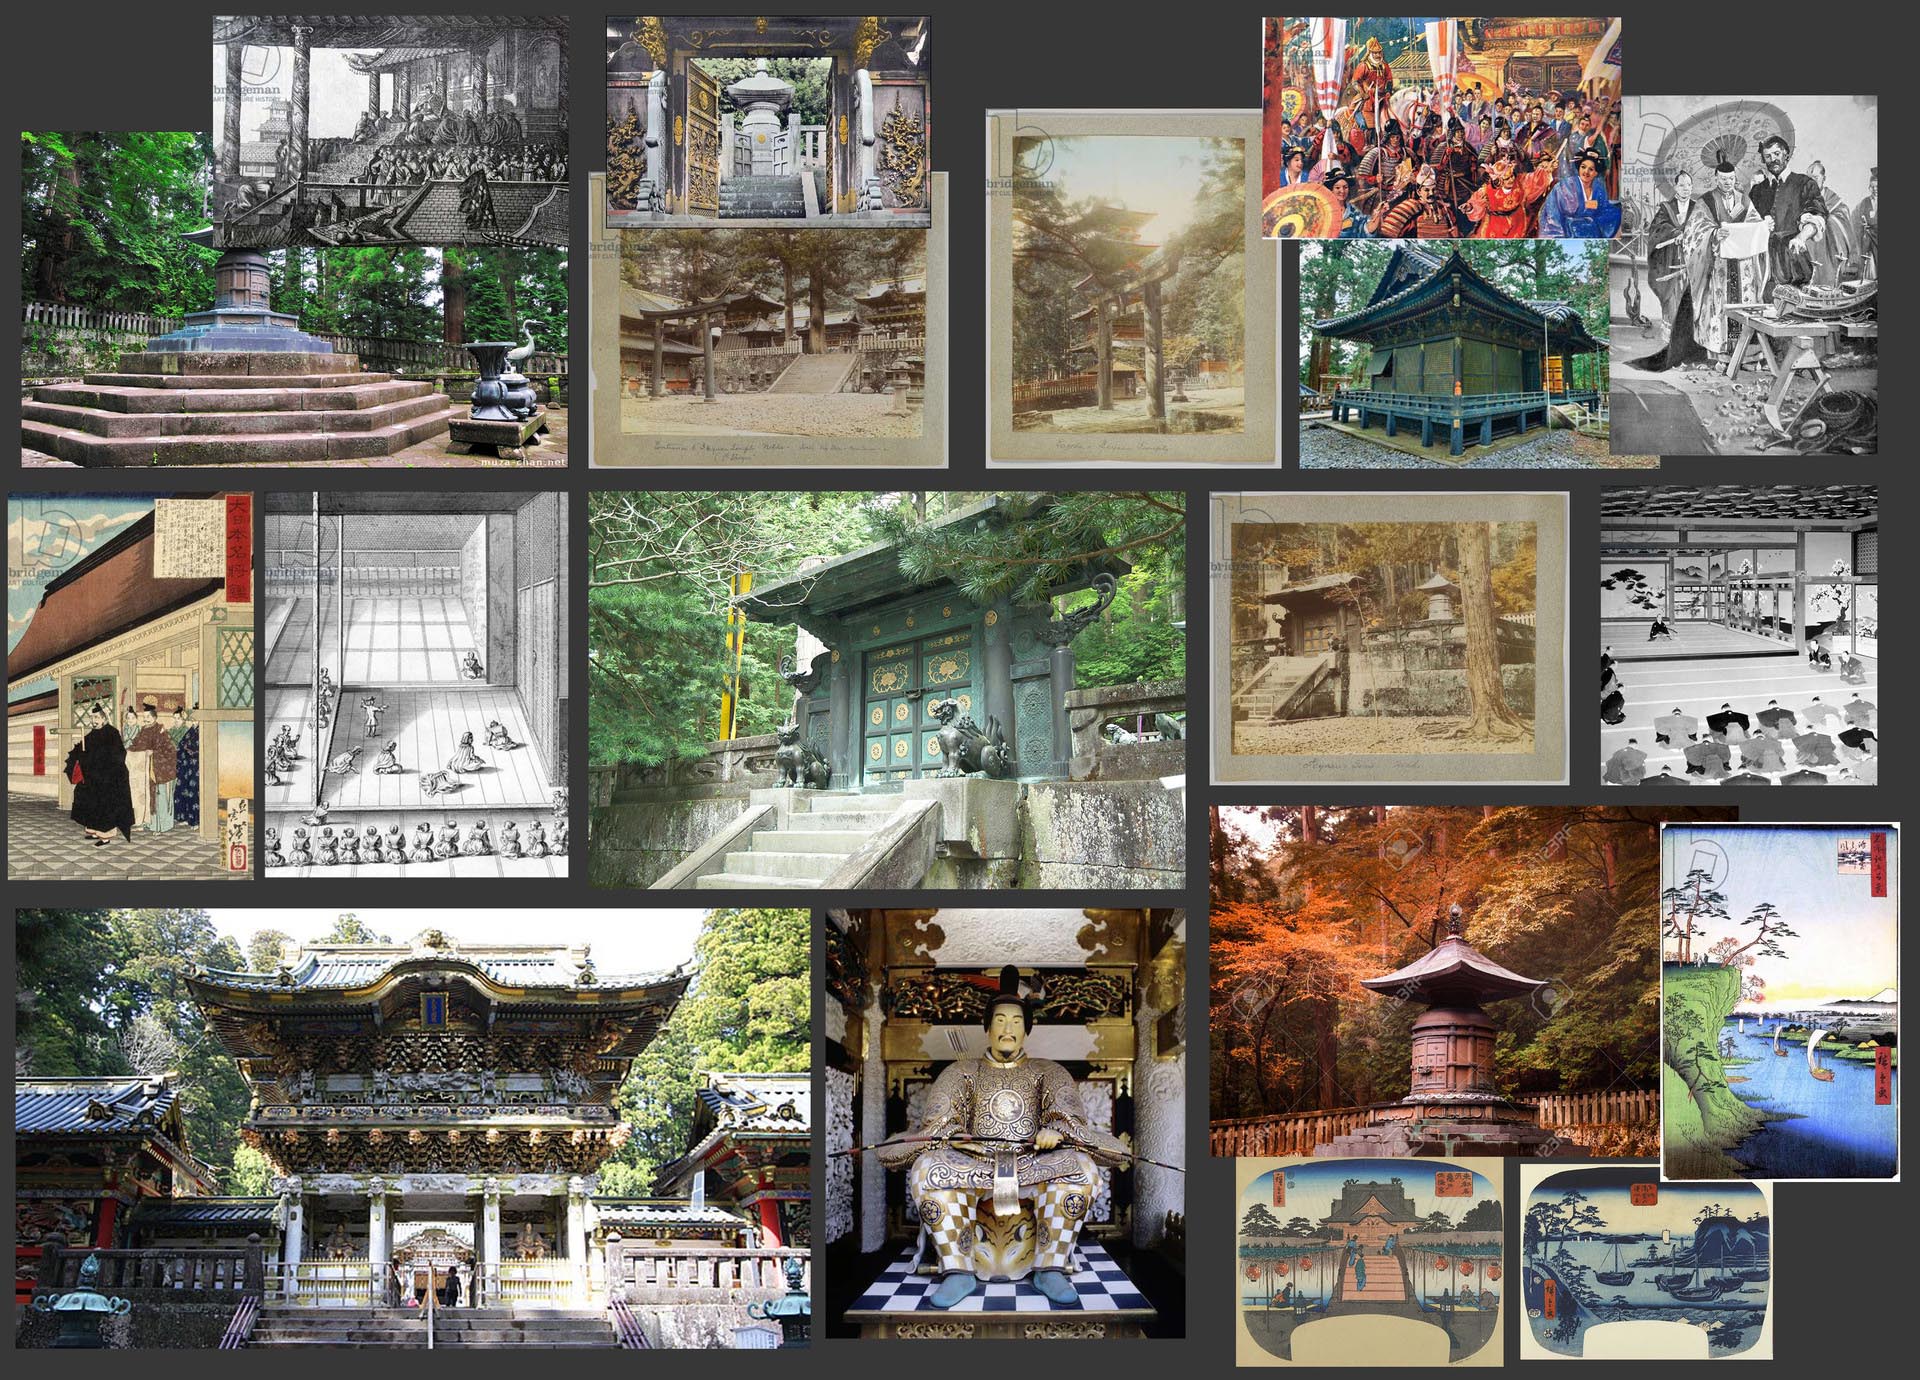 A moodboard screenshot that includes 17 images, drawings, old photographs and more of Feudal Japanese architecture, huts, gates.